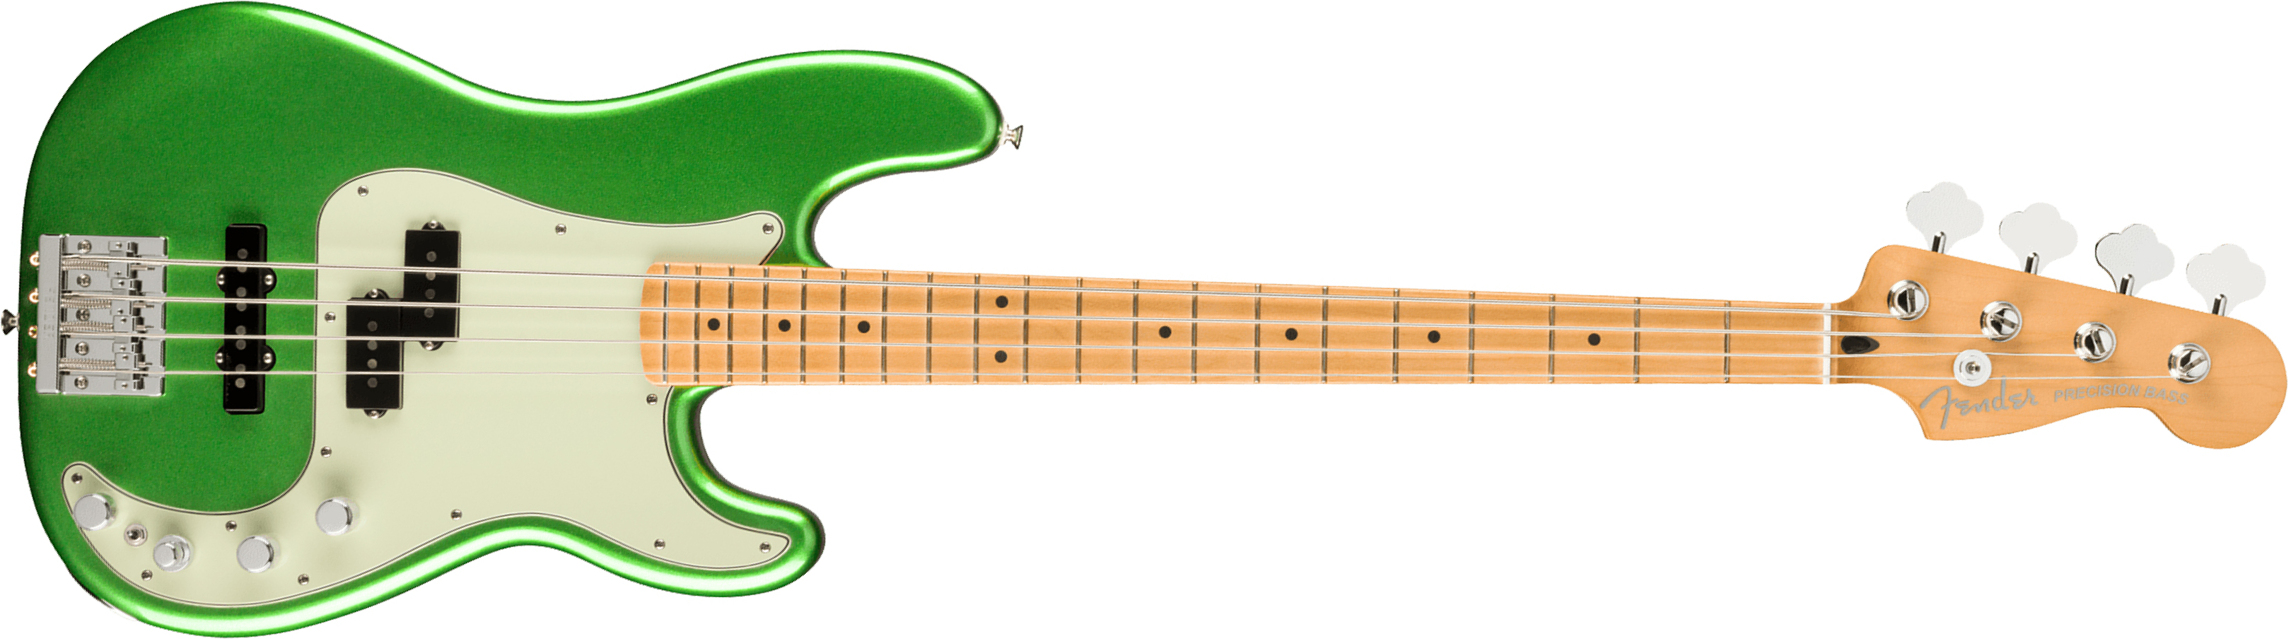 Fender Precision Bass Player Plus Mex Active Mn - Cosmic Jade - Solid body electric bass - Main picture